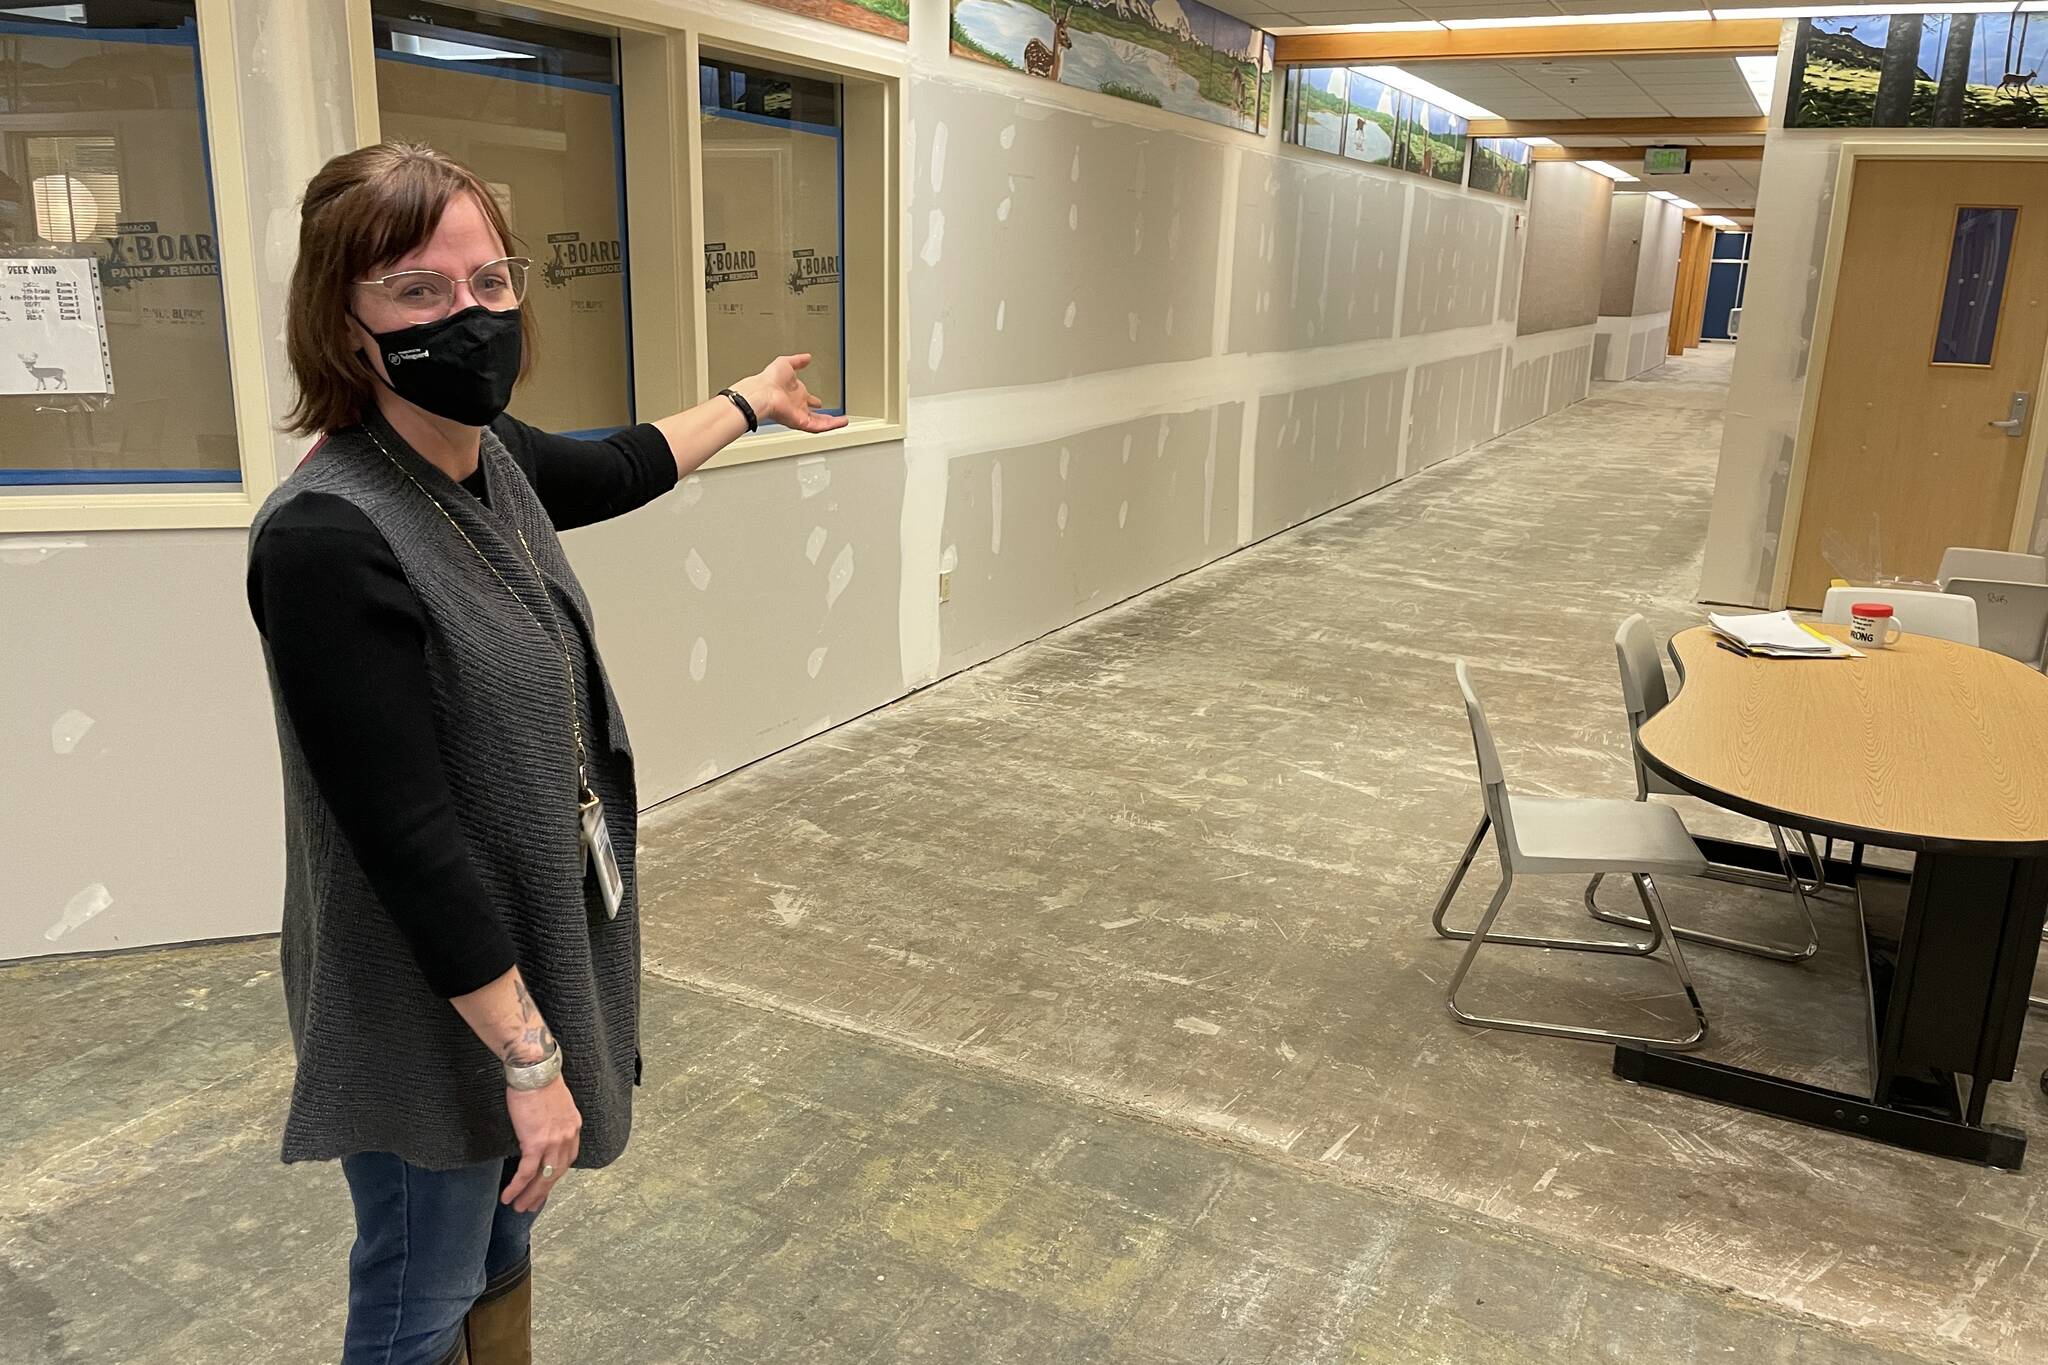 Michael S. Lockett / Juneau Empire 
Riverbend Elementary School principal Elizabeth Pisel-Davis gestures at the walls and concrete floors left bare following massive flooding from a burst pipe in the school in January.